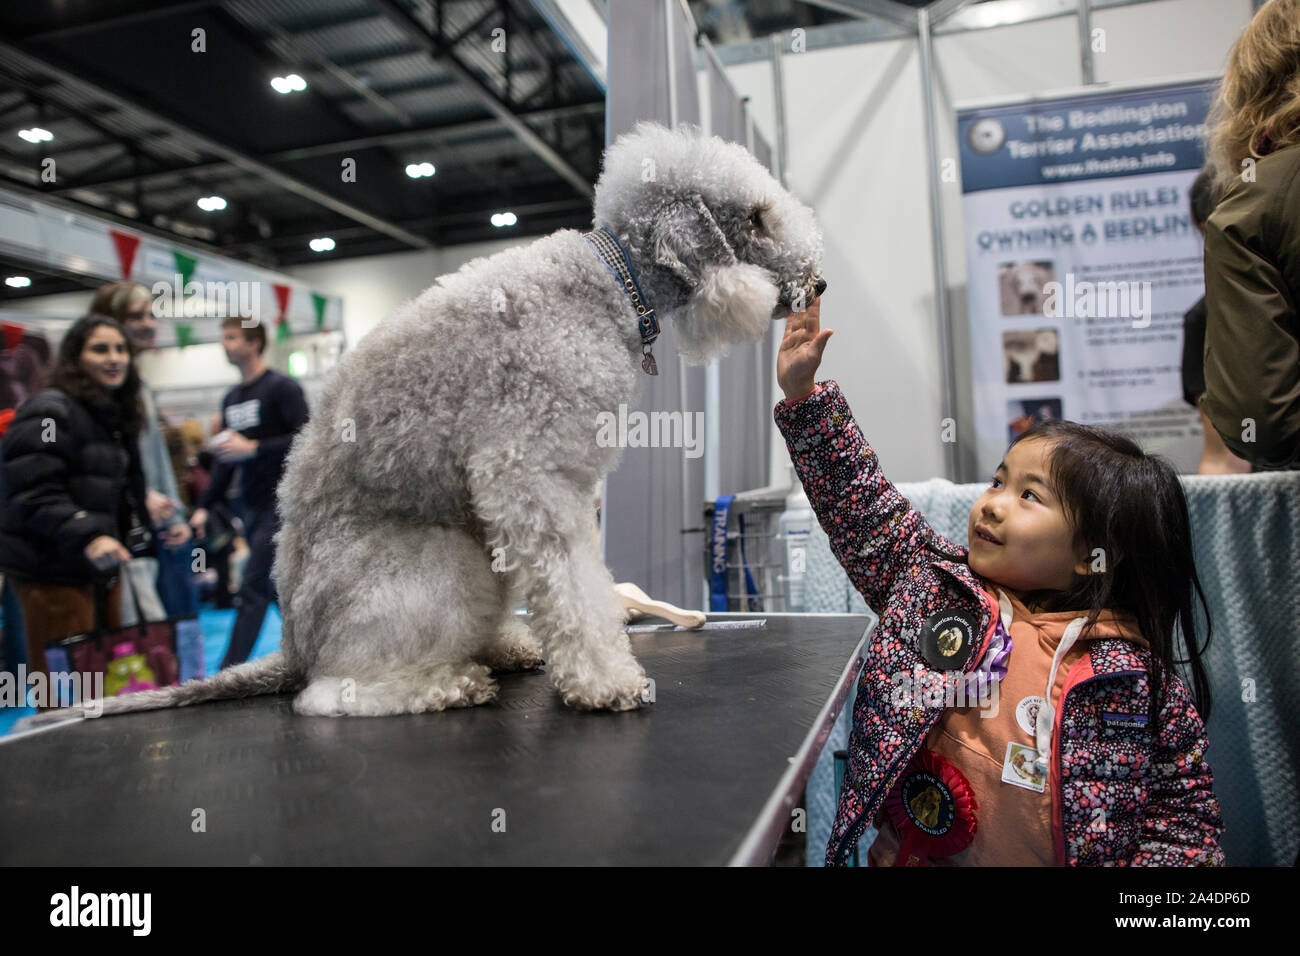 The Kennel Club Discovery Dogs exhibition at Excel London, UK. Picture shows a child stroking a Bedlington Terrier in one of the discovery booths. Stock Photo